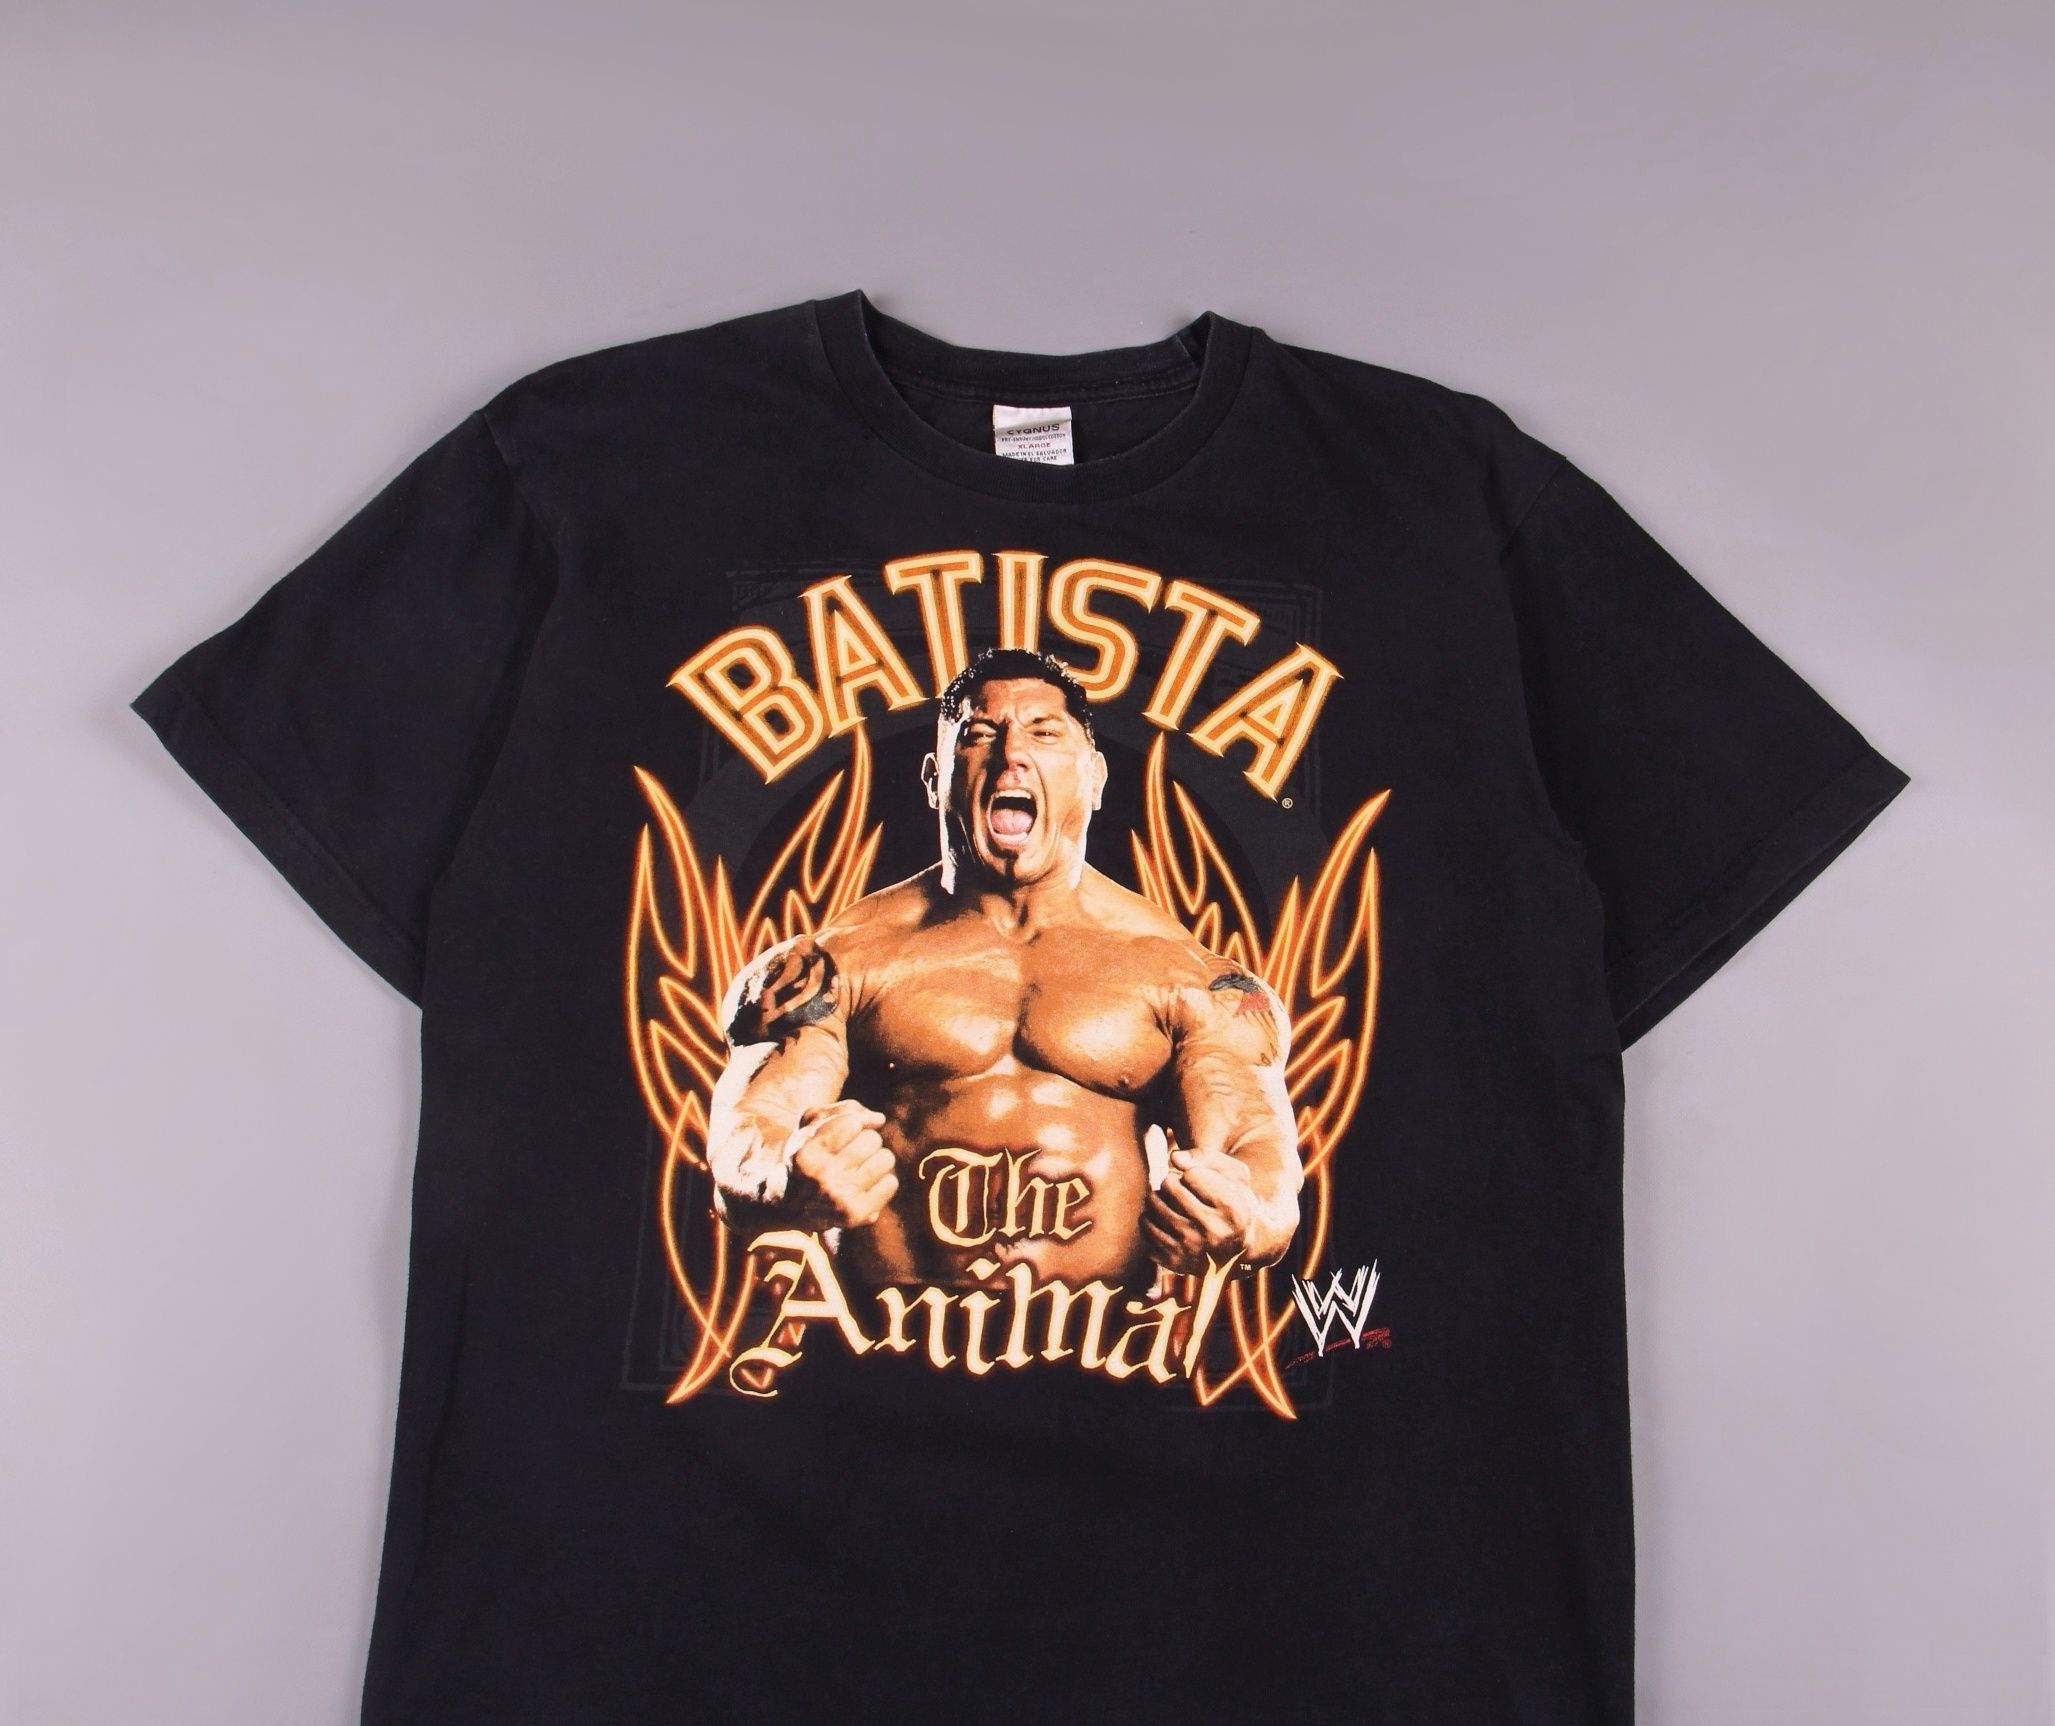 Vintage Vintage WWE Batista The Animal Tee T-Shirt WWF S Size US S / EU 44-46 / 1 - 4 Preview